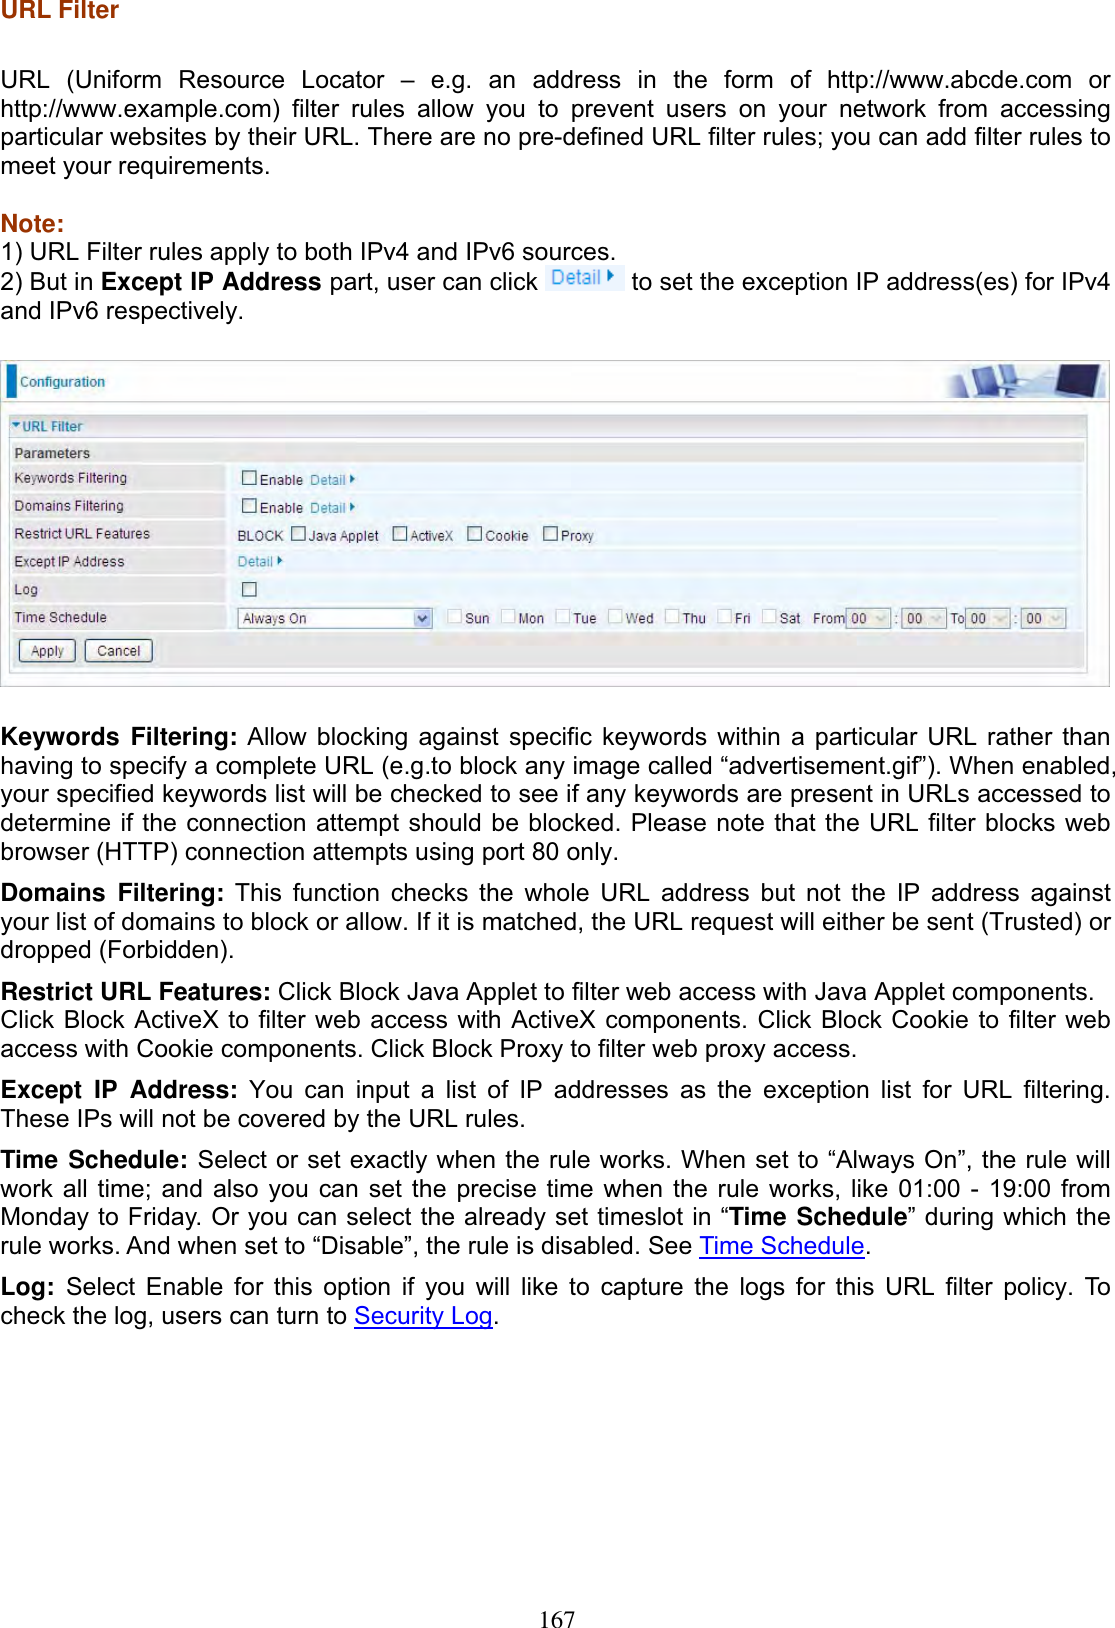 167URL Filter URL (Uniform Resource Locator – e.g. an address in the form of http://www.abcde.com or http://www.example.com) filter rules allow you to prevent users on your network from accessing particular websites by their URL. There are no pre-defined URL filter rules; you can add filter rules to meet your requirements. Note:1) URL Filter rules apply to both IPv4 and IPv6 sources. 2) But in Except IP Address part, user can click   to set the exception IP address(es) for IPv4 and IPv6 respectively. Keywords Filtering: Allow blocking against specific keywords within a particular URL rather than having to specify a complete URL (e.g.to block any image called “advertisement.gif”). When enabled, your specified keywords list will be checked to see if any keywords are present in URLs accessed to determine if the connection attempt should be blocked. Please note that the URL filter blocks web browser (HTTP) connection attempts using port 80 only. Domains Filtering: This function checks the whole URL address but not the IP address against your list of domains to block or allow. If it is matched, the URL request will either be sent (Trusted) or dropped (Forbidden). Restrict URL Features: Click Block Java Applet to filter web access with Java Applet components. Click Block ActiveX to filter web access with ActiveX components. Click Block Cookie to filter web access with Cookie components. Click Block Proxy to filter web proxy access. Except IP Address: You can input a list of IP addresses as the exception list for URL filtering. These IPs will not be covered by the URL rules. Time Schedule: Select or set exactly when the rule works. When set to “Always On”, the rule will work all time; and also you can set the precise time when the rule works, like 01:00 - 19:00 from Monday to Friday. Or you can select the already set timeslot in “Time Schedule” during which the rule works. And when set to “Disable”, the rule is disabled. See Time Schedule.Log: Select Enable for this option if you will like to capture the logs for this URL filter policy. To check the log, users can turn to Security Log.